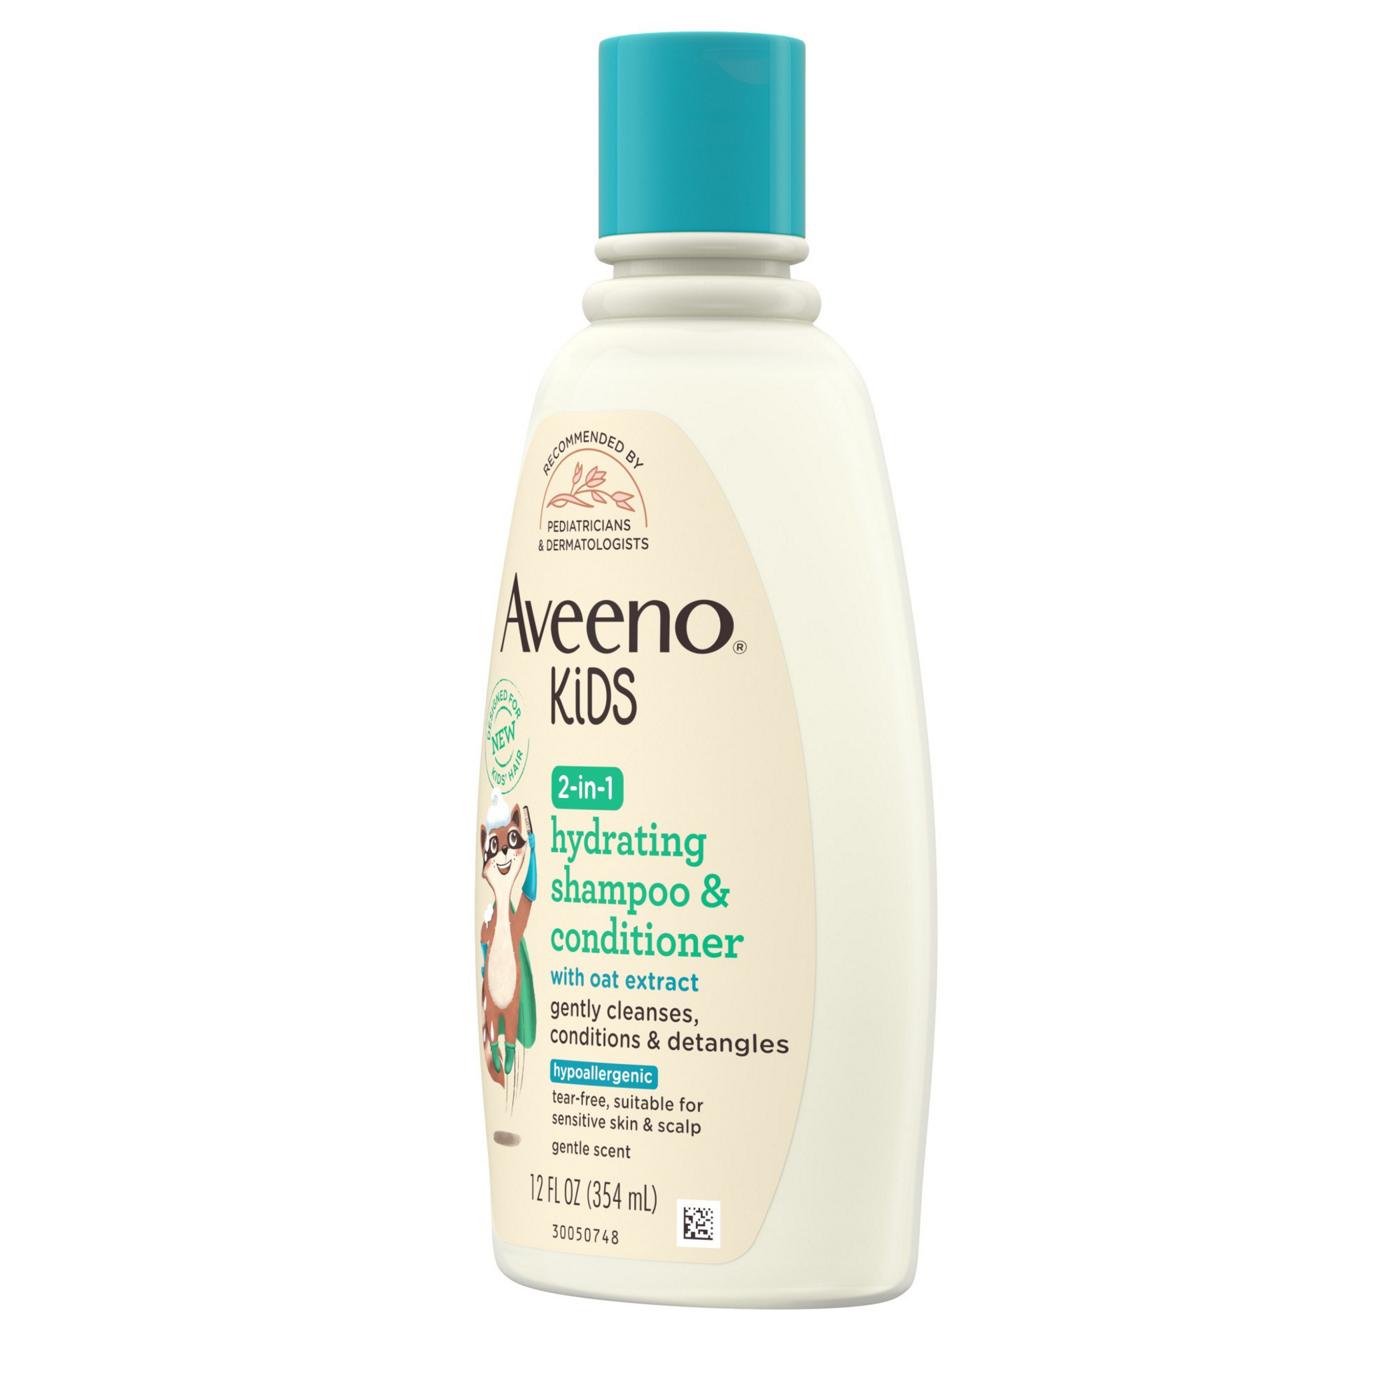 Aveeno Kids 2 in 1 Hydrating Shampoo & Conditioner; image 4 of 5